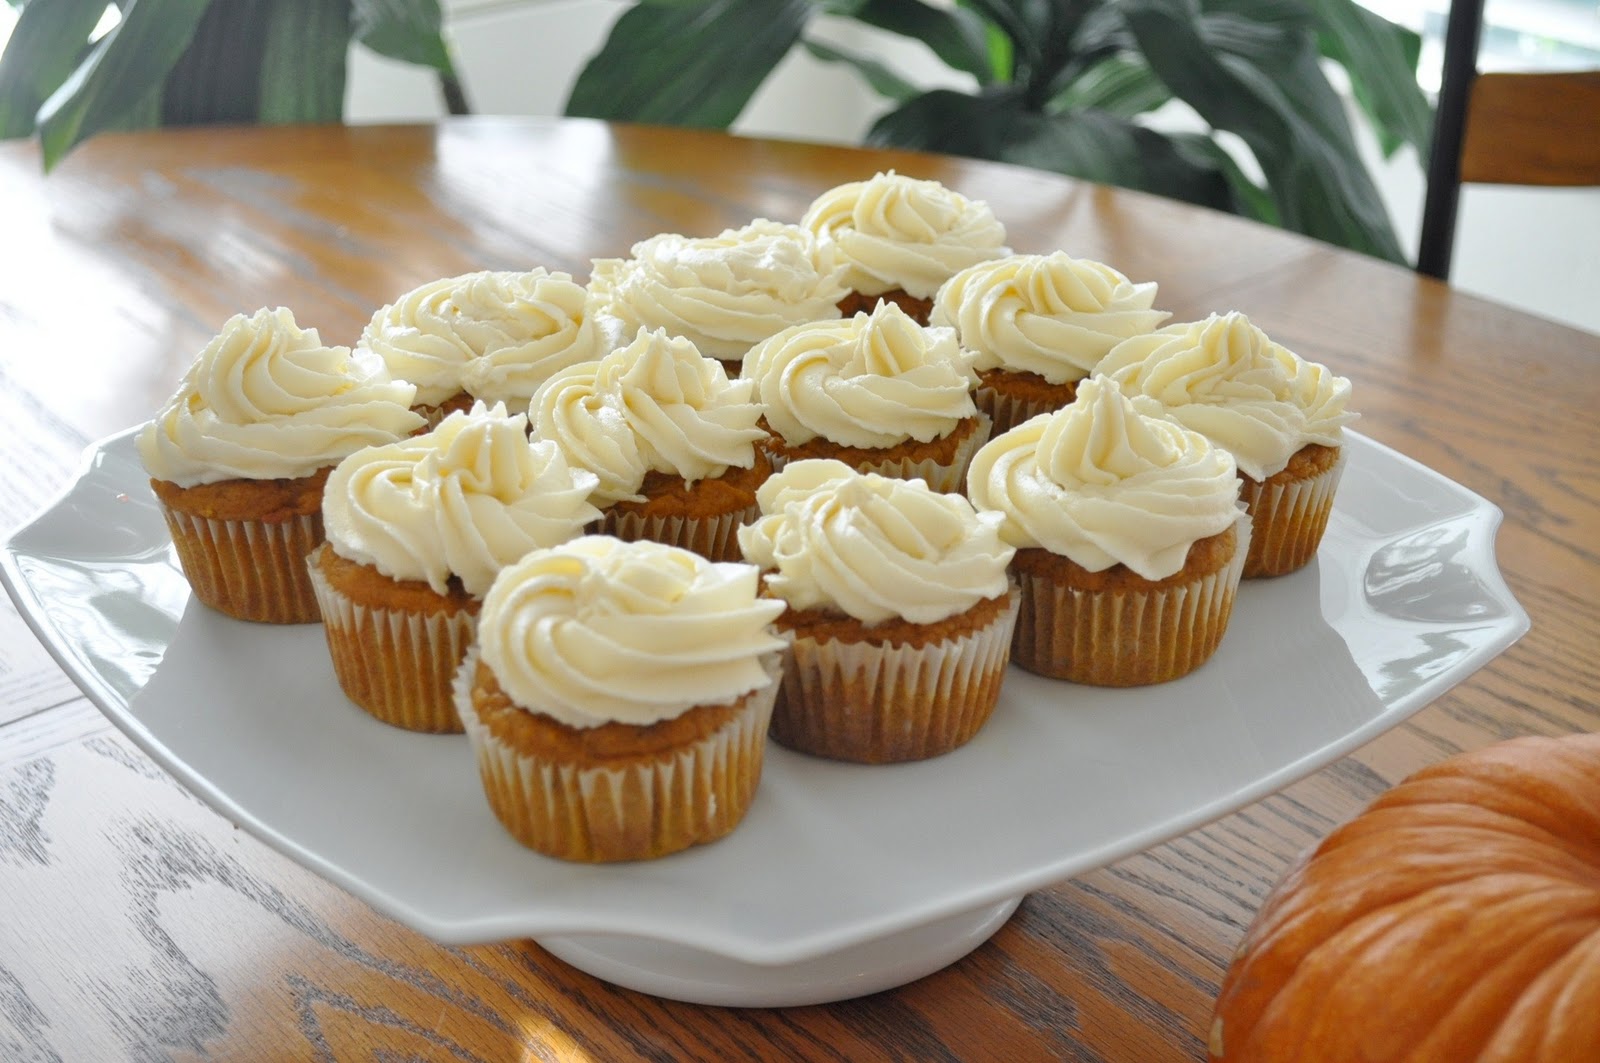 Freeing My Martha: Pumpkin Cupcakes with Maple-Cream Cheese Frosting